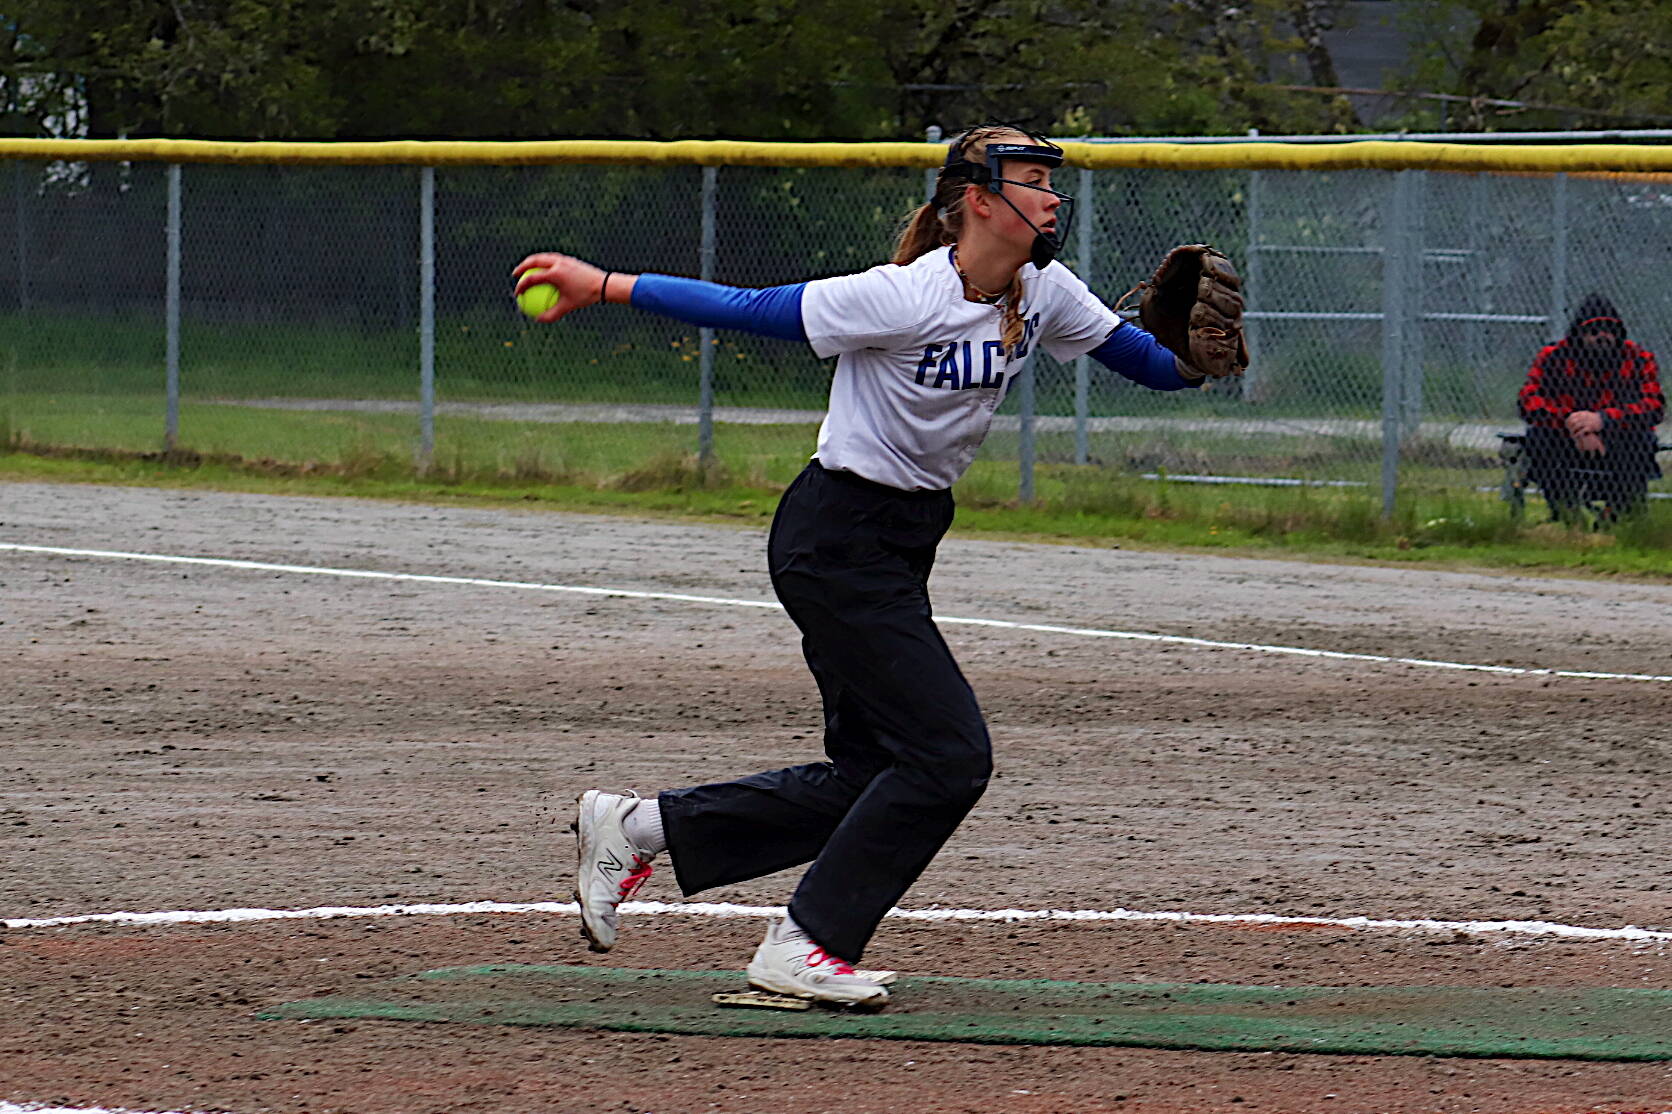 Thunder Mountain High School’s Ashlyn Gates, seen here pitching against Sitka High School during the Region V softball conference tournament last Saturday in Juneau, was named player of the game in an 8-0 win over Delta Junction High School to open the state softball title tournament on Thursday in Fairbanks. (Jasz Garrett / Juneau Empire file photo)